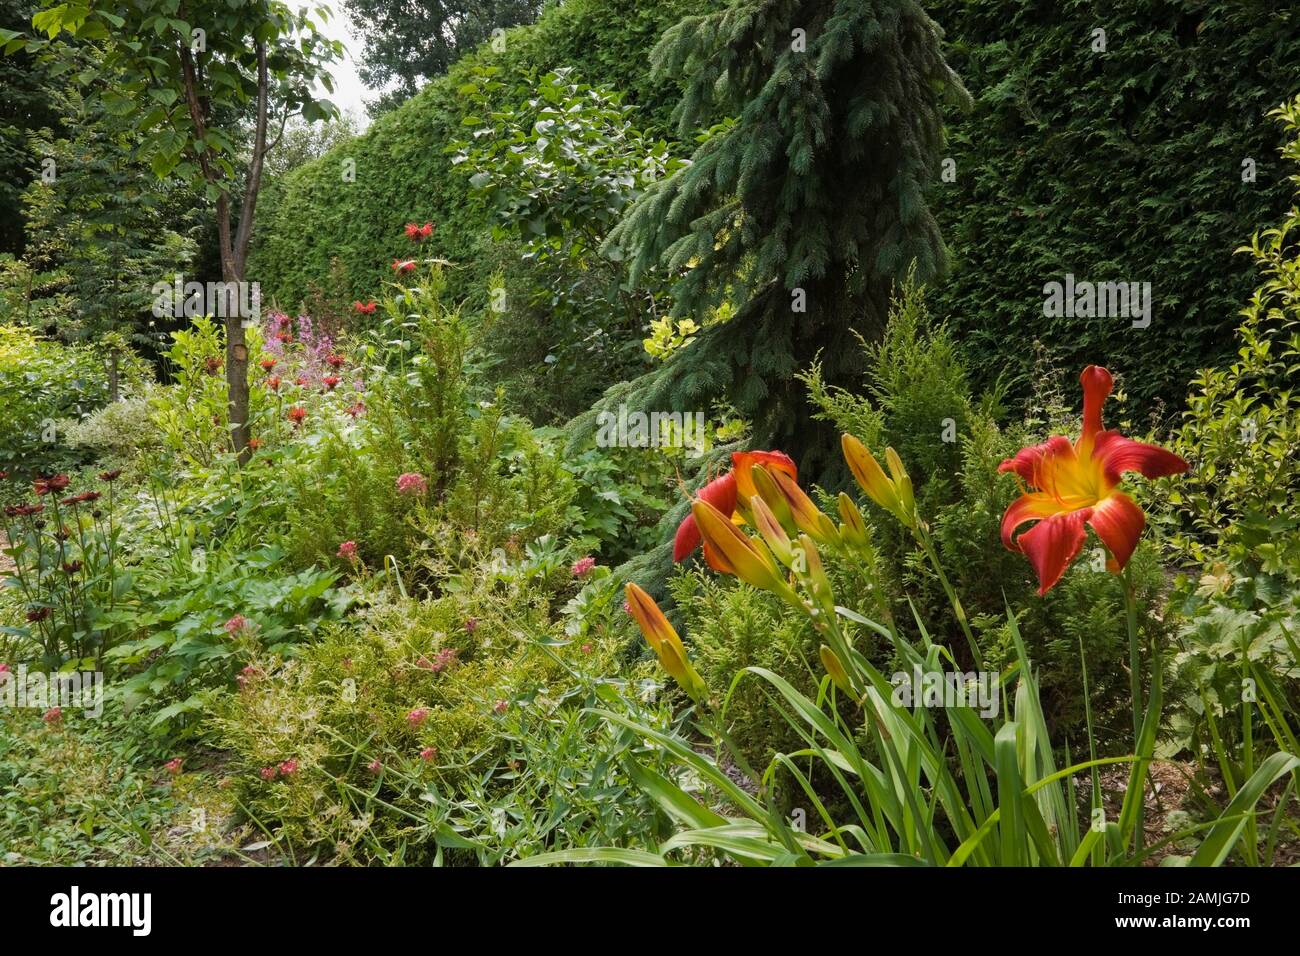 Mixed border with red and yellow Hemerocallis - Daylily flowers, Picea pendula - Spruce tree and Thuja occidentalis - Cedar hedge in private backyard Stock Photo